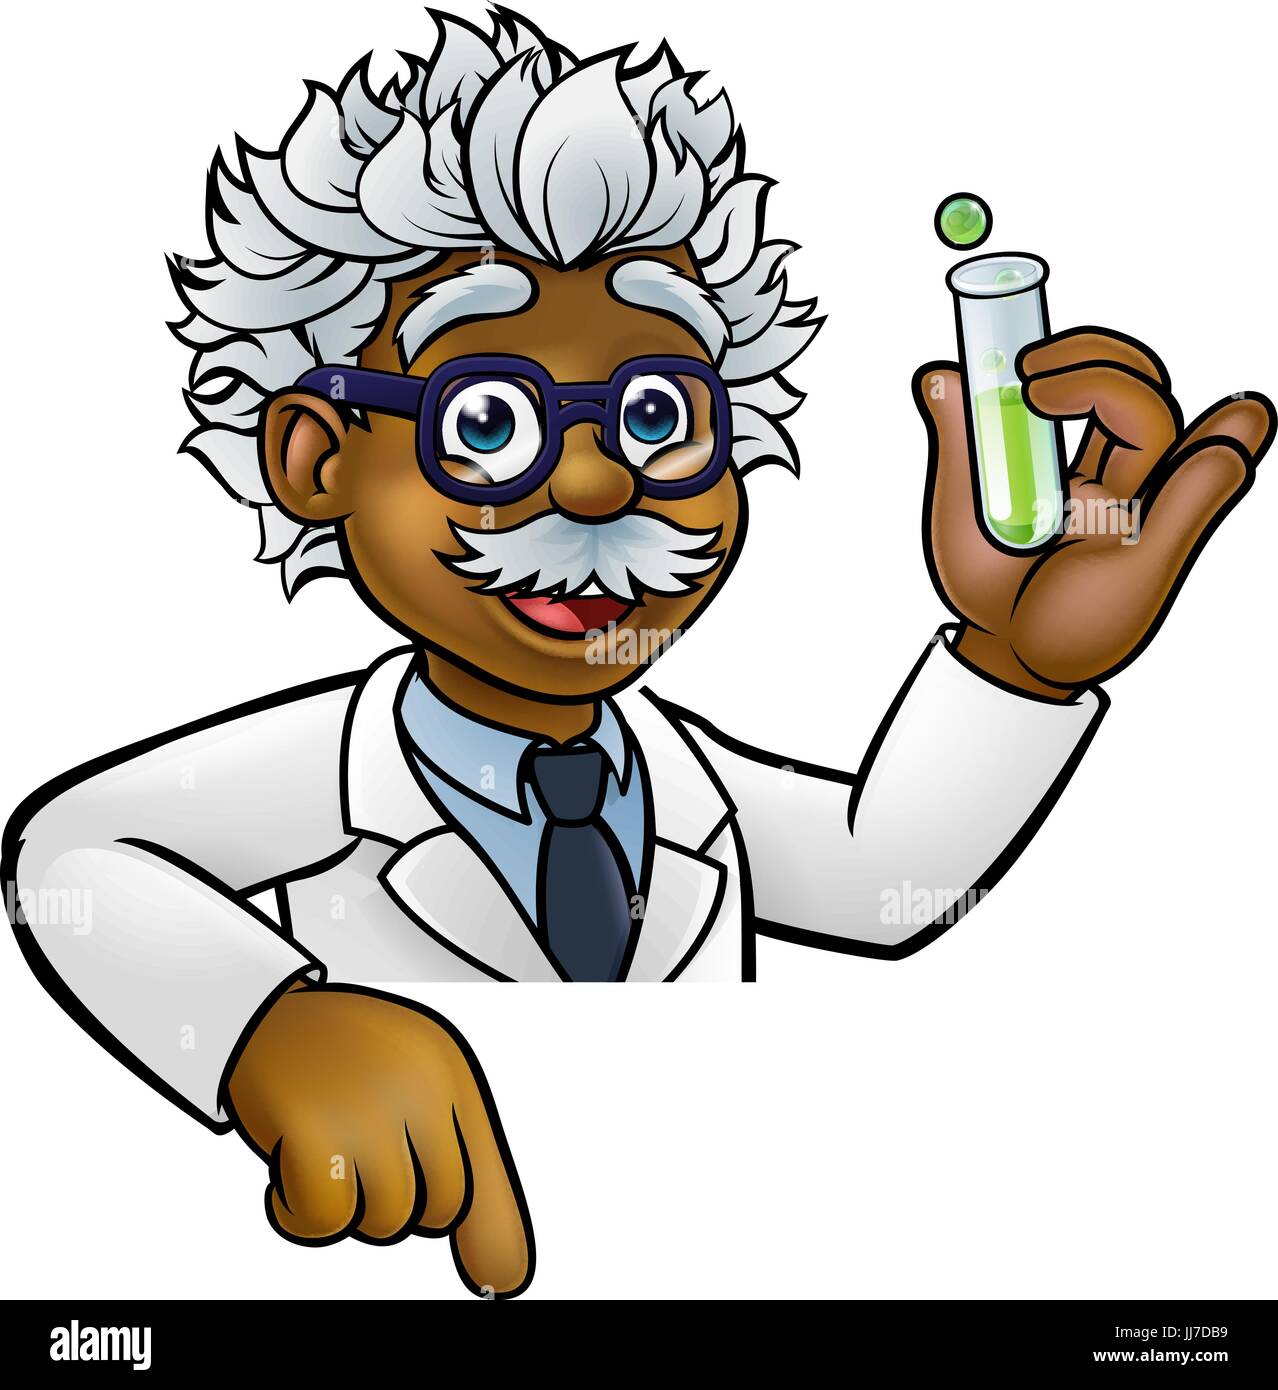 Scientist Cartoon Character Holding Test Tube Stock Vector